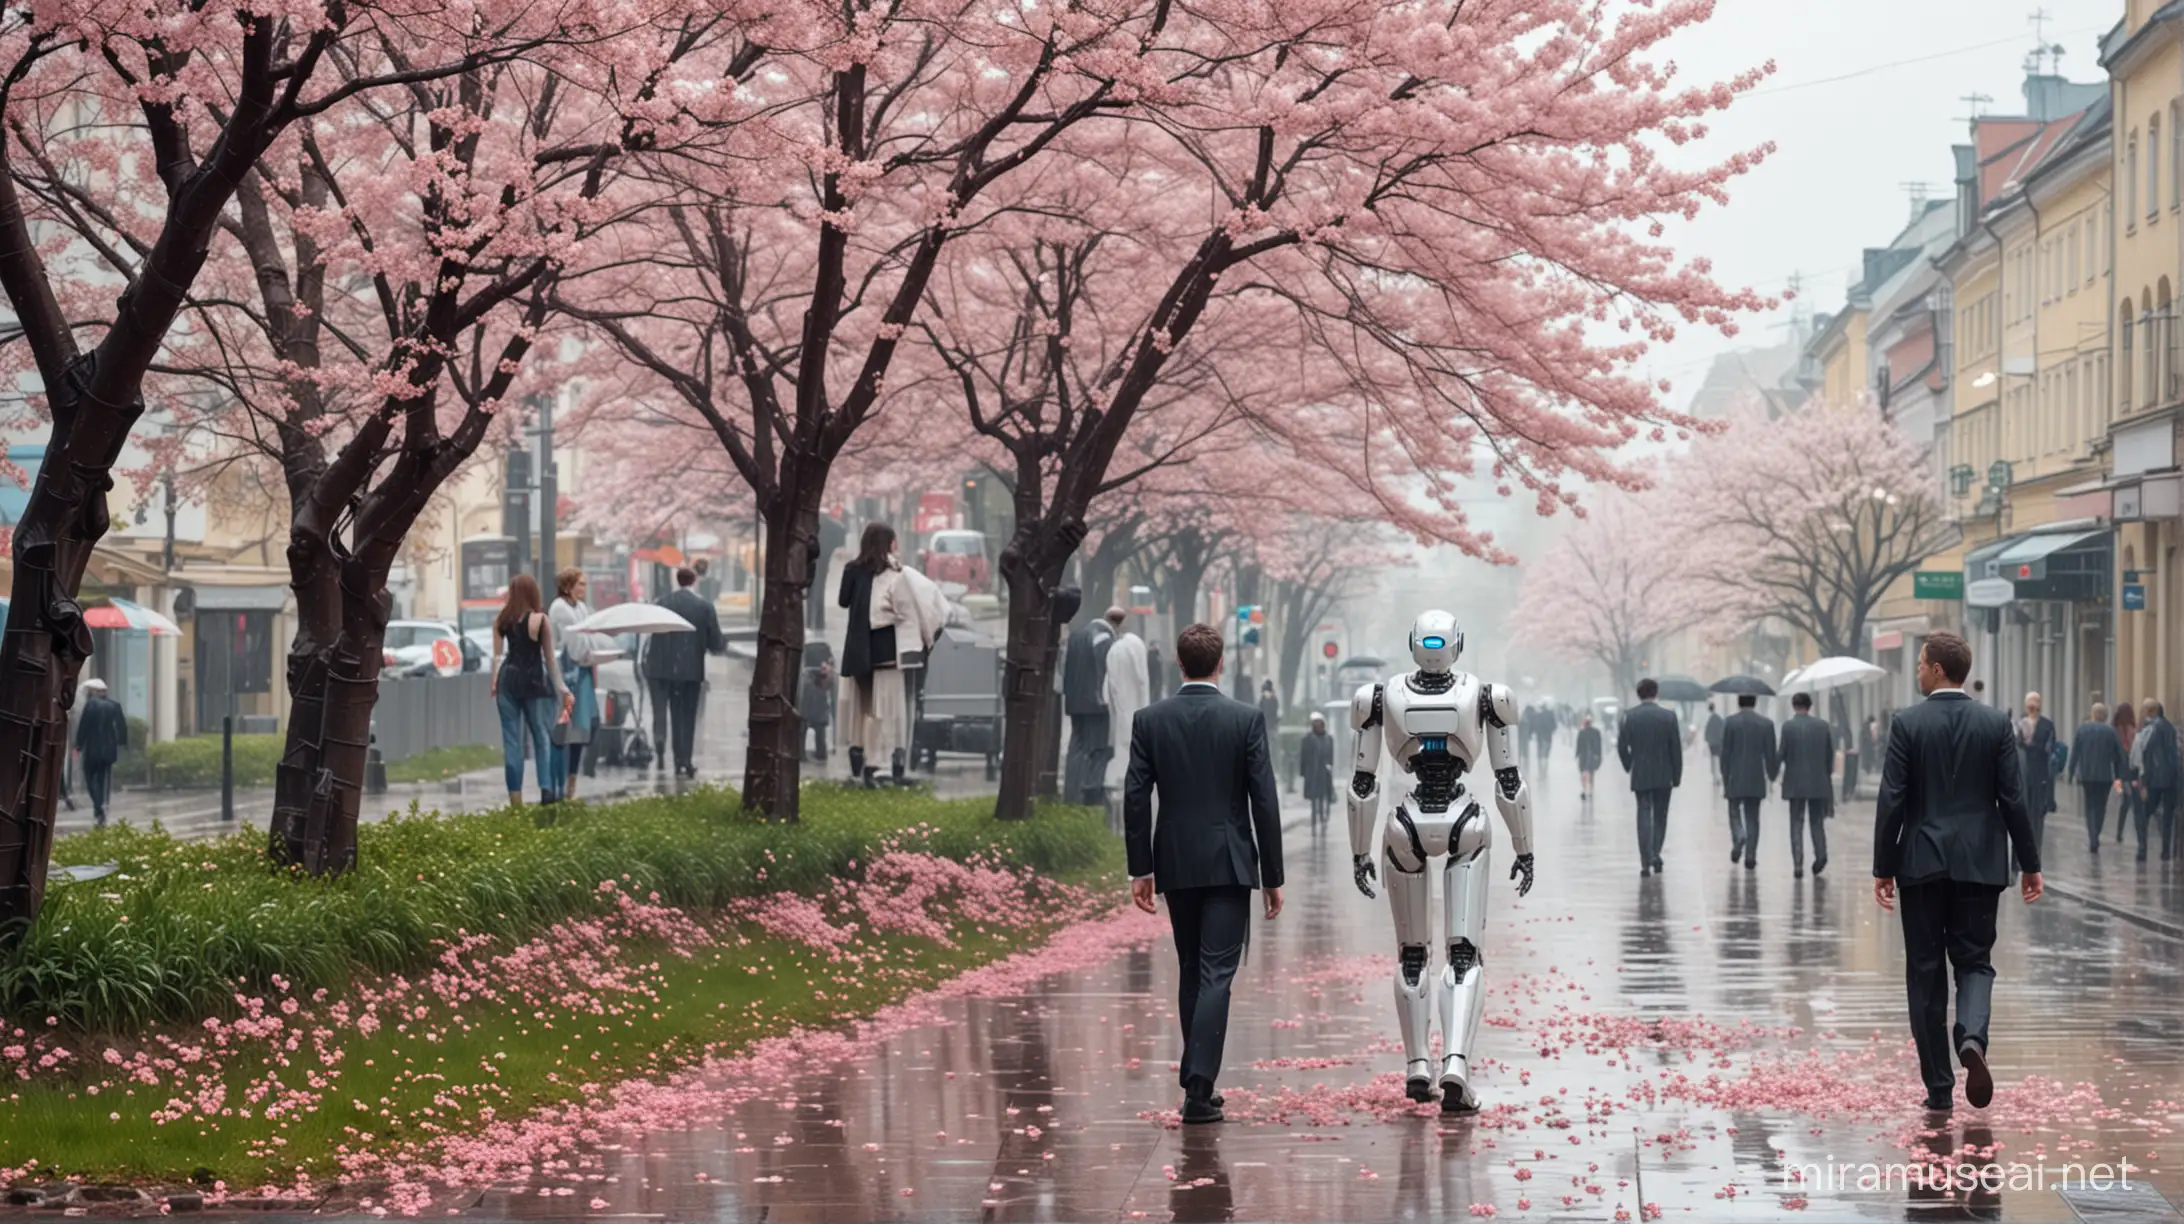 friendly artificial intelligence robots and lawyers (including men and woman, friendly robots) walking down together in vilnius while discussing about law, sunny spring day and  sacuras trees in a backround, but blossoms felt down already, and its raining too, digital art